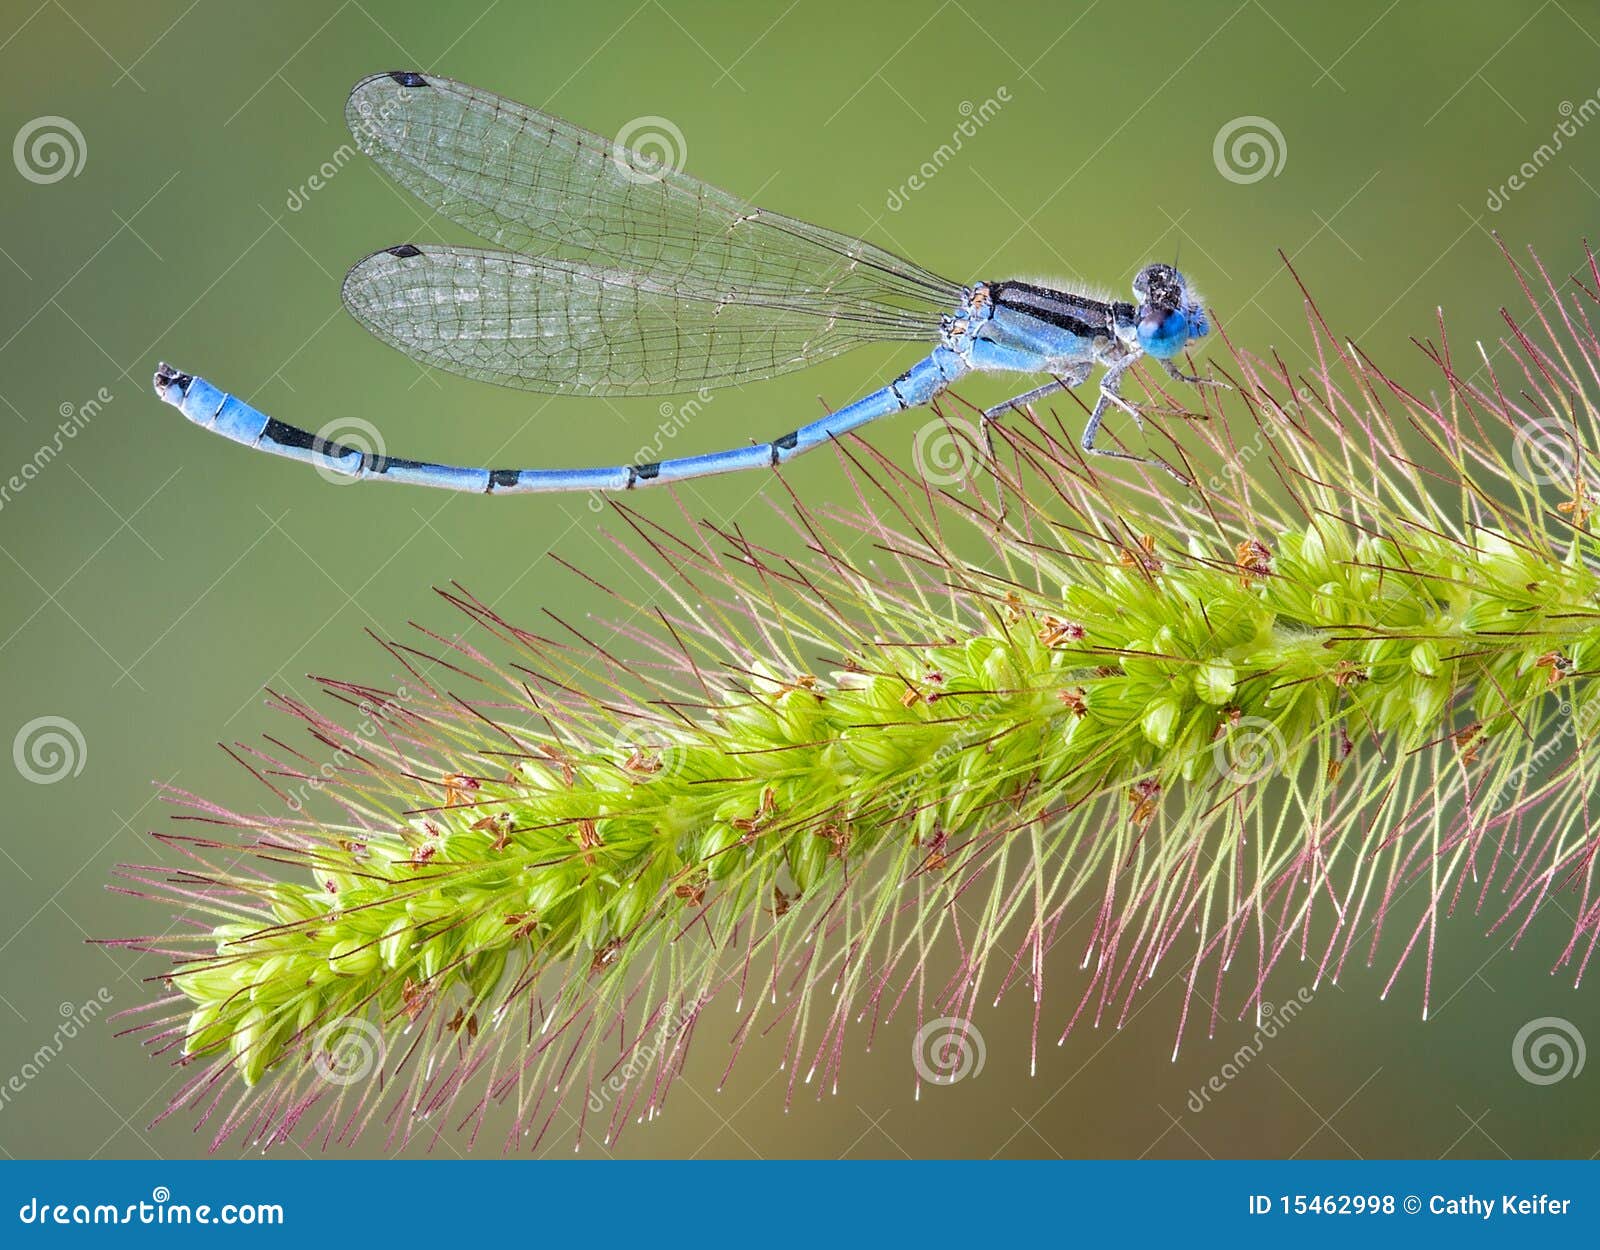 curved damselfly on foxtail